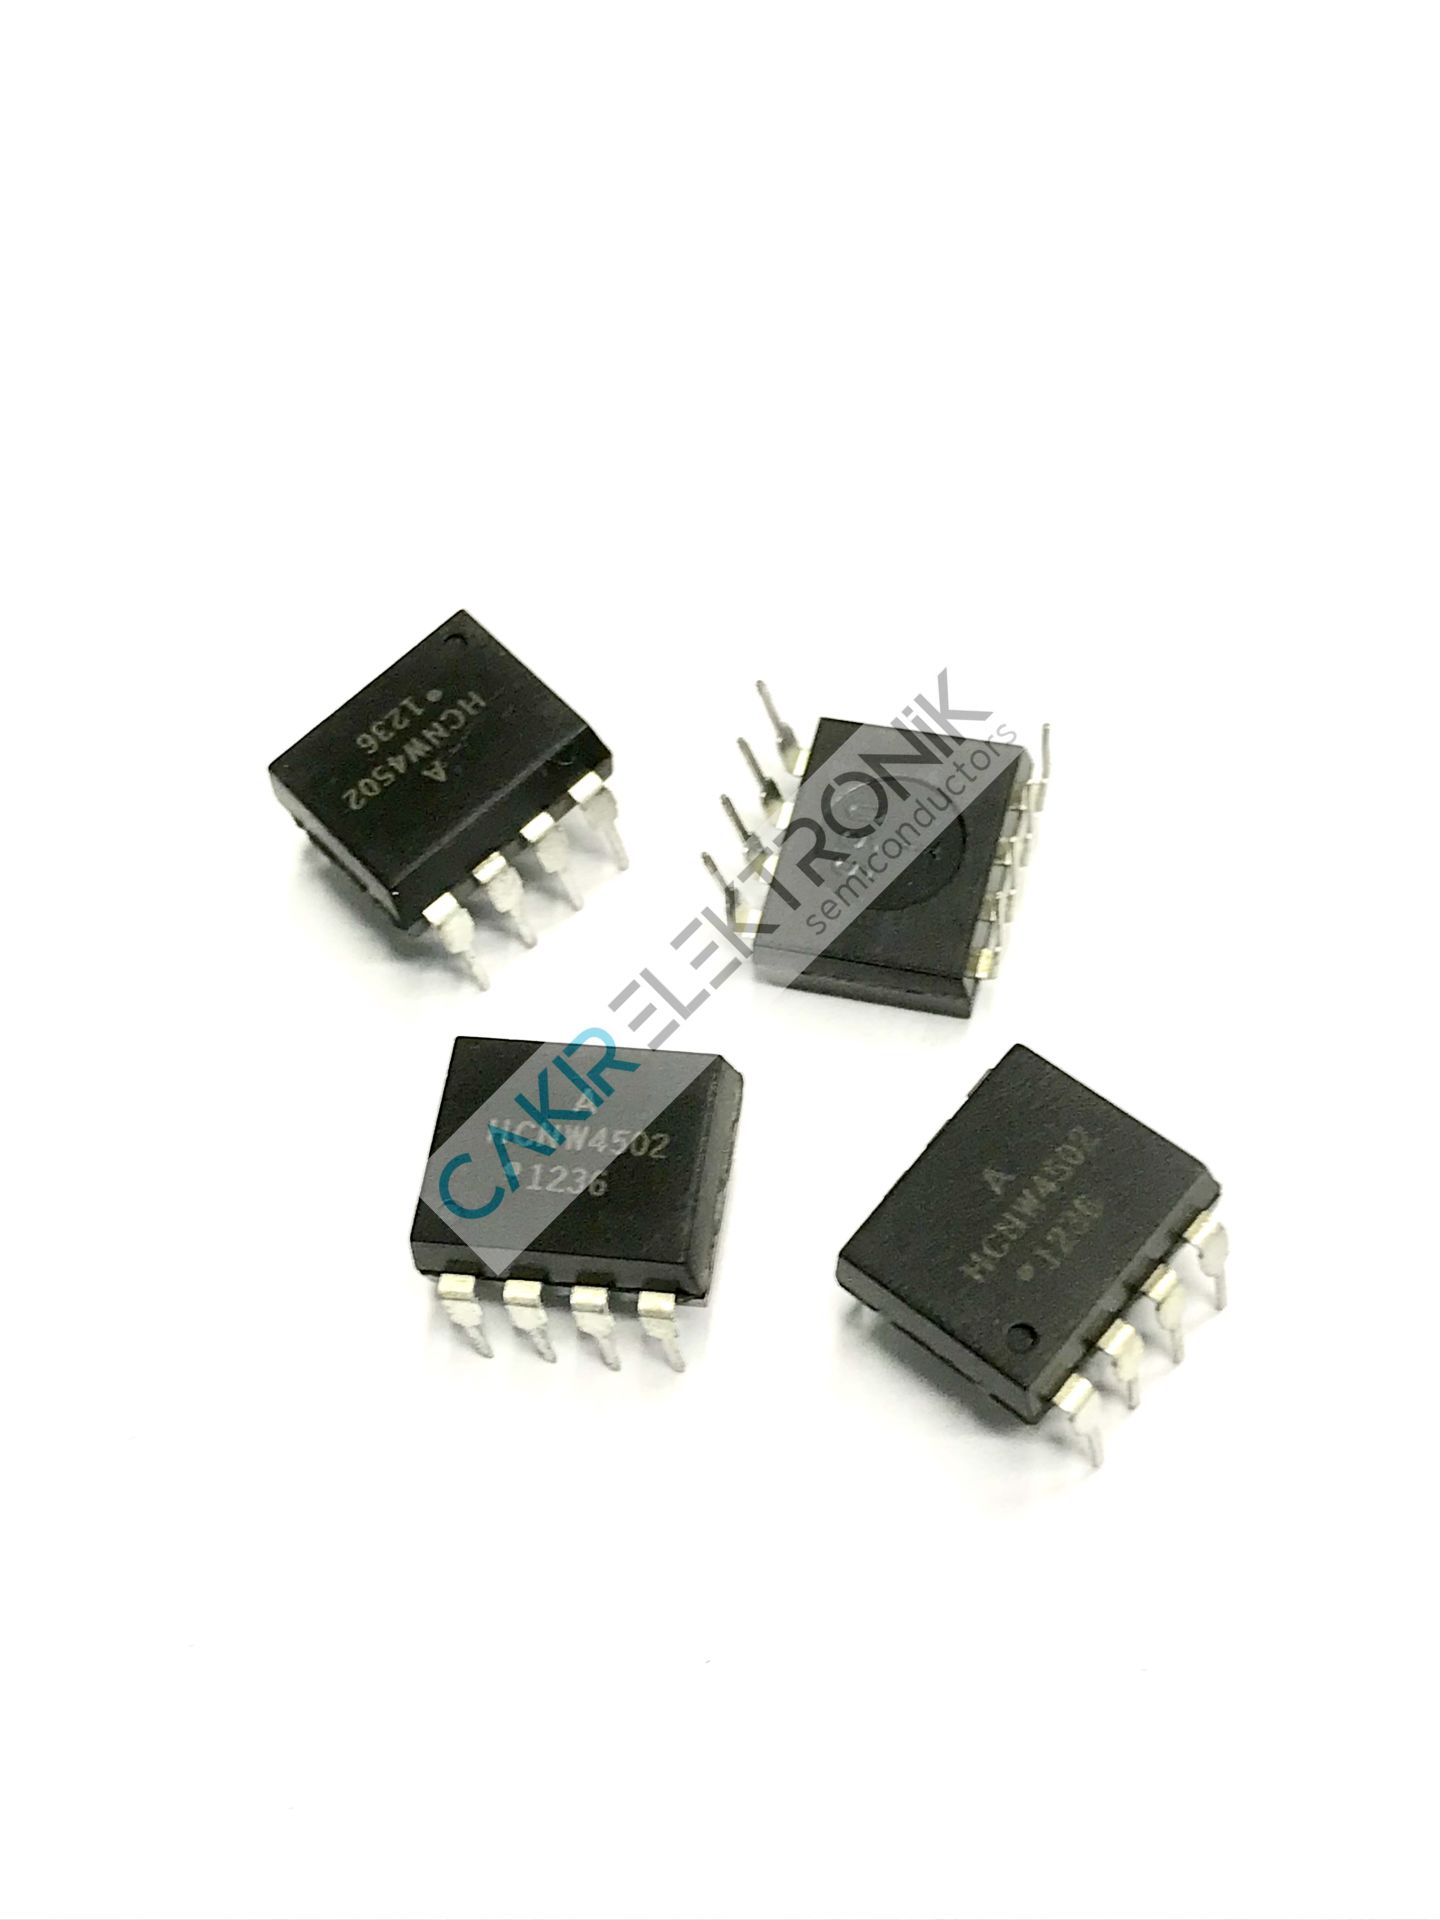 HCNW4502 - A4502 - 4502 OPTO ,Single Channel, High Speed Optocouplers